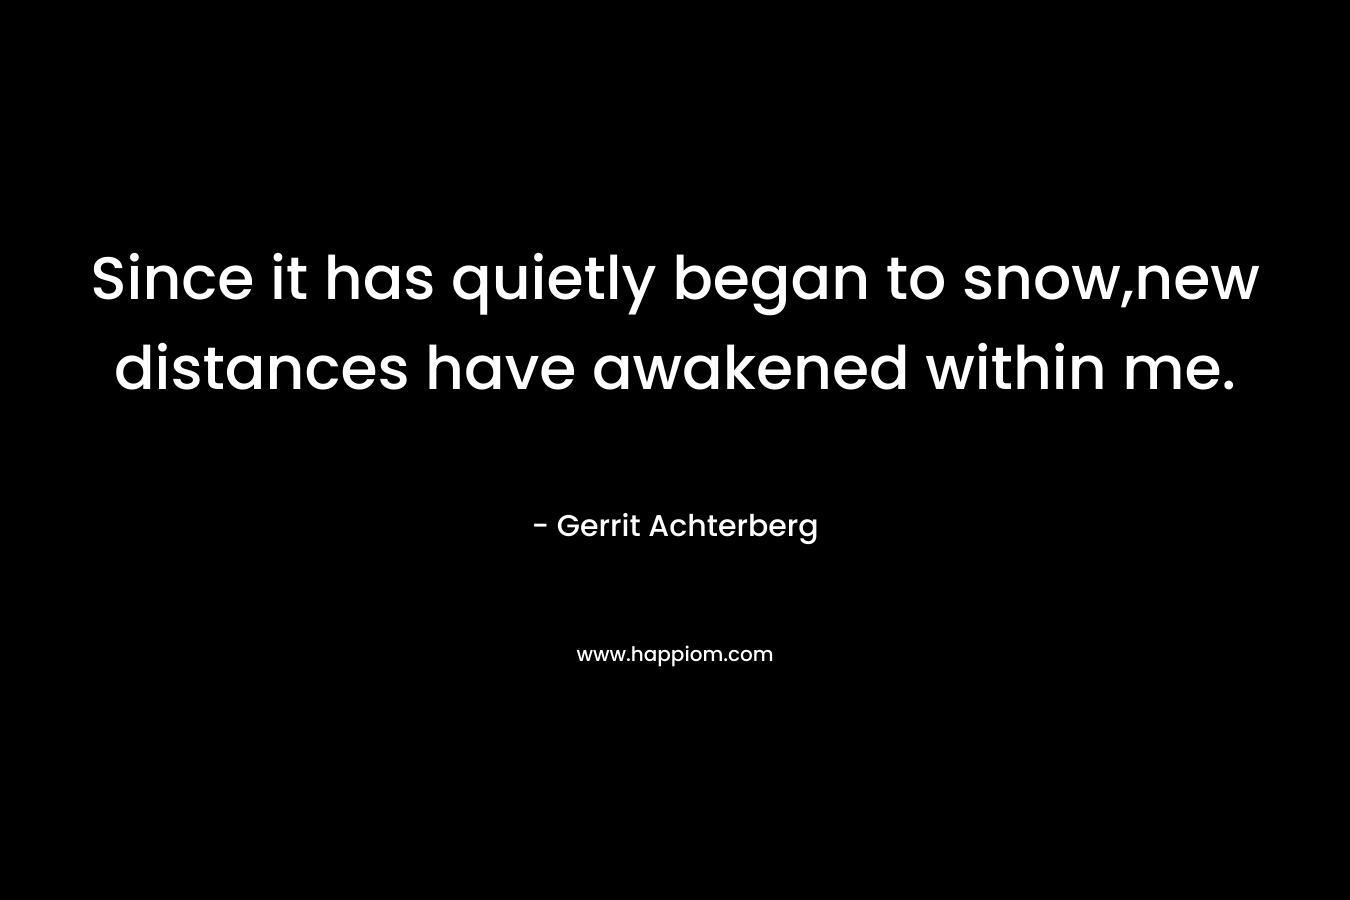 Since it has quietly began to snow,new distances have awakened within me. – Gerrit Achterberg